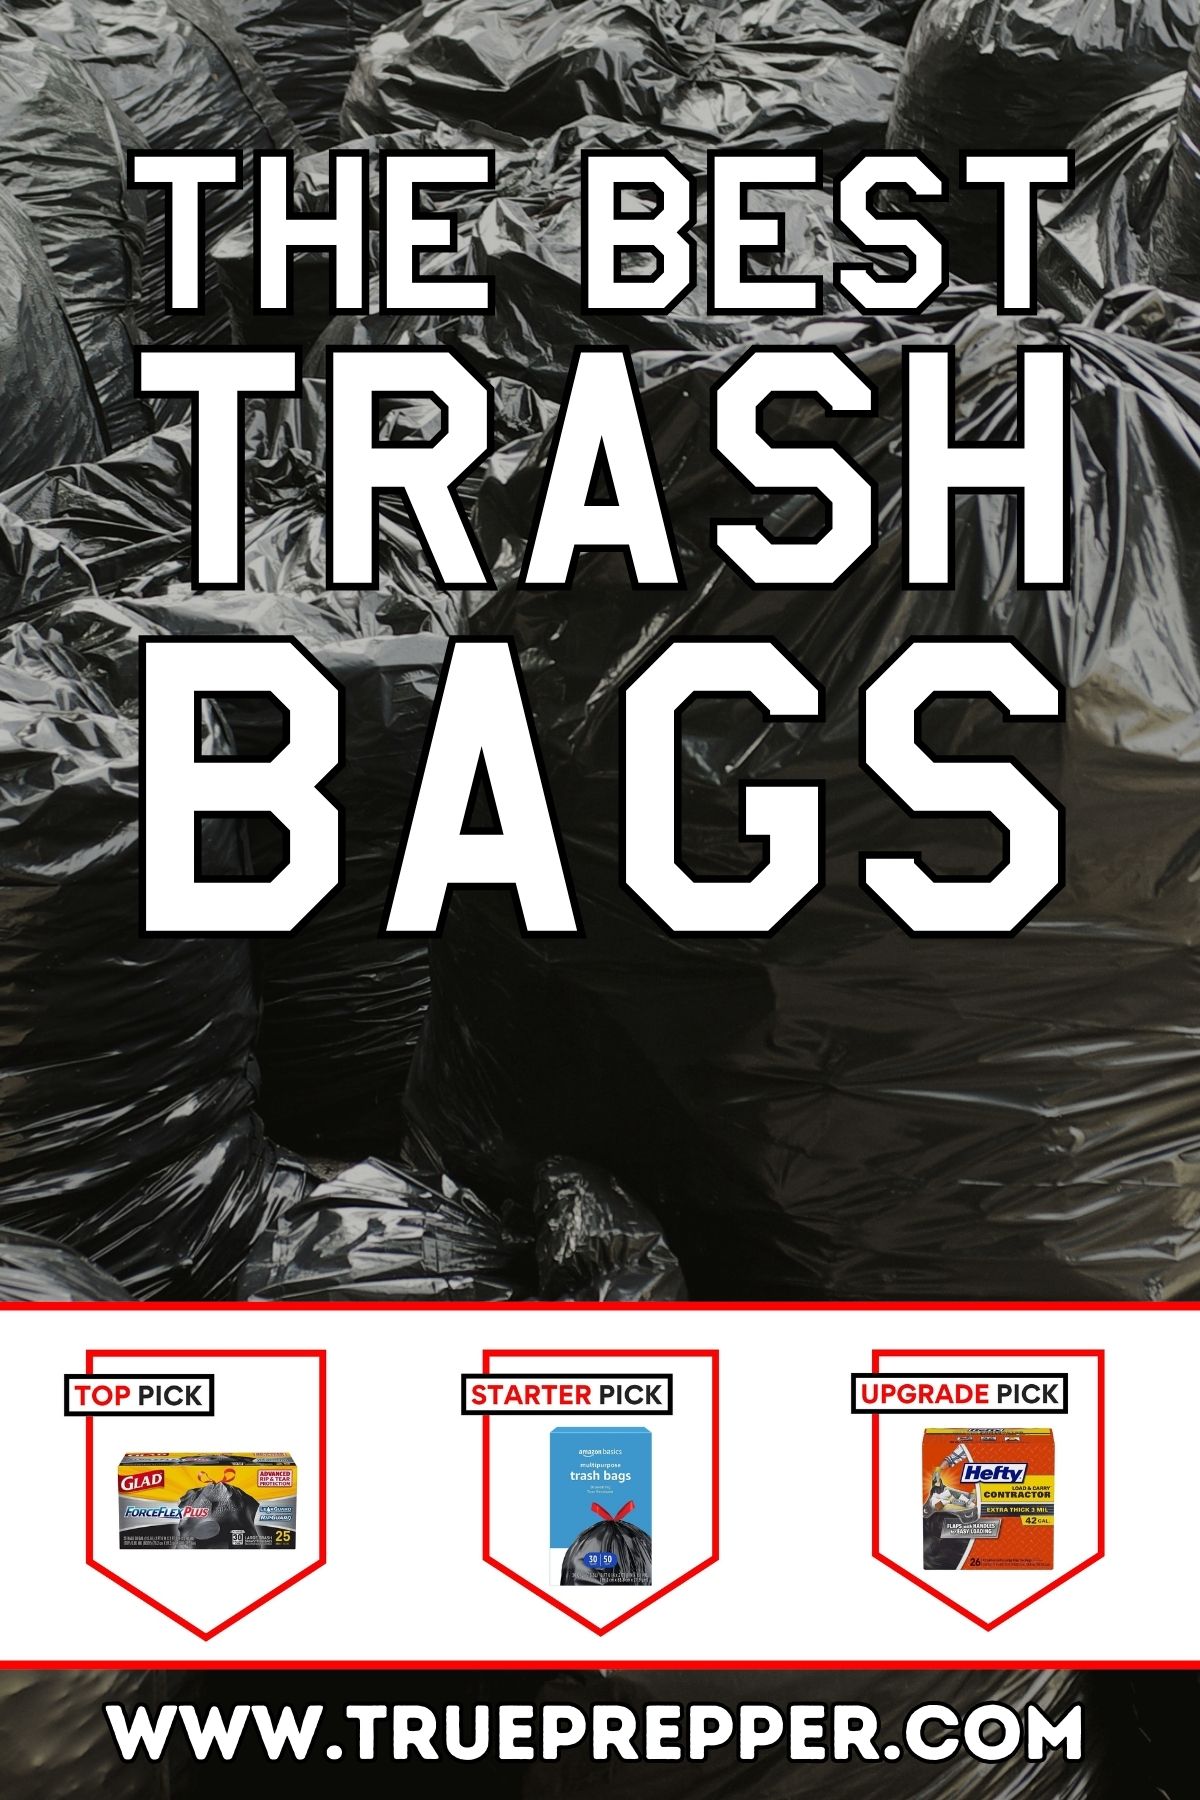 Best Trash Bags for Security, Survival, and Prepping